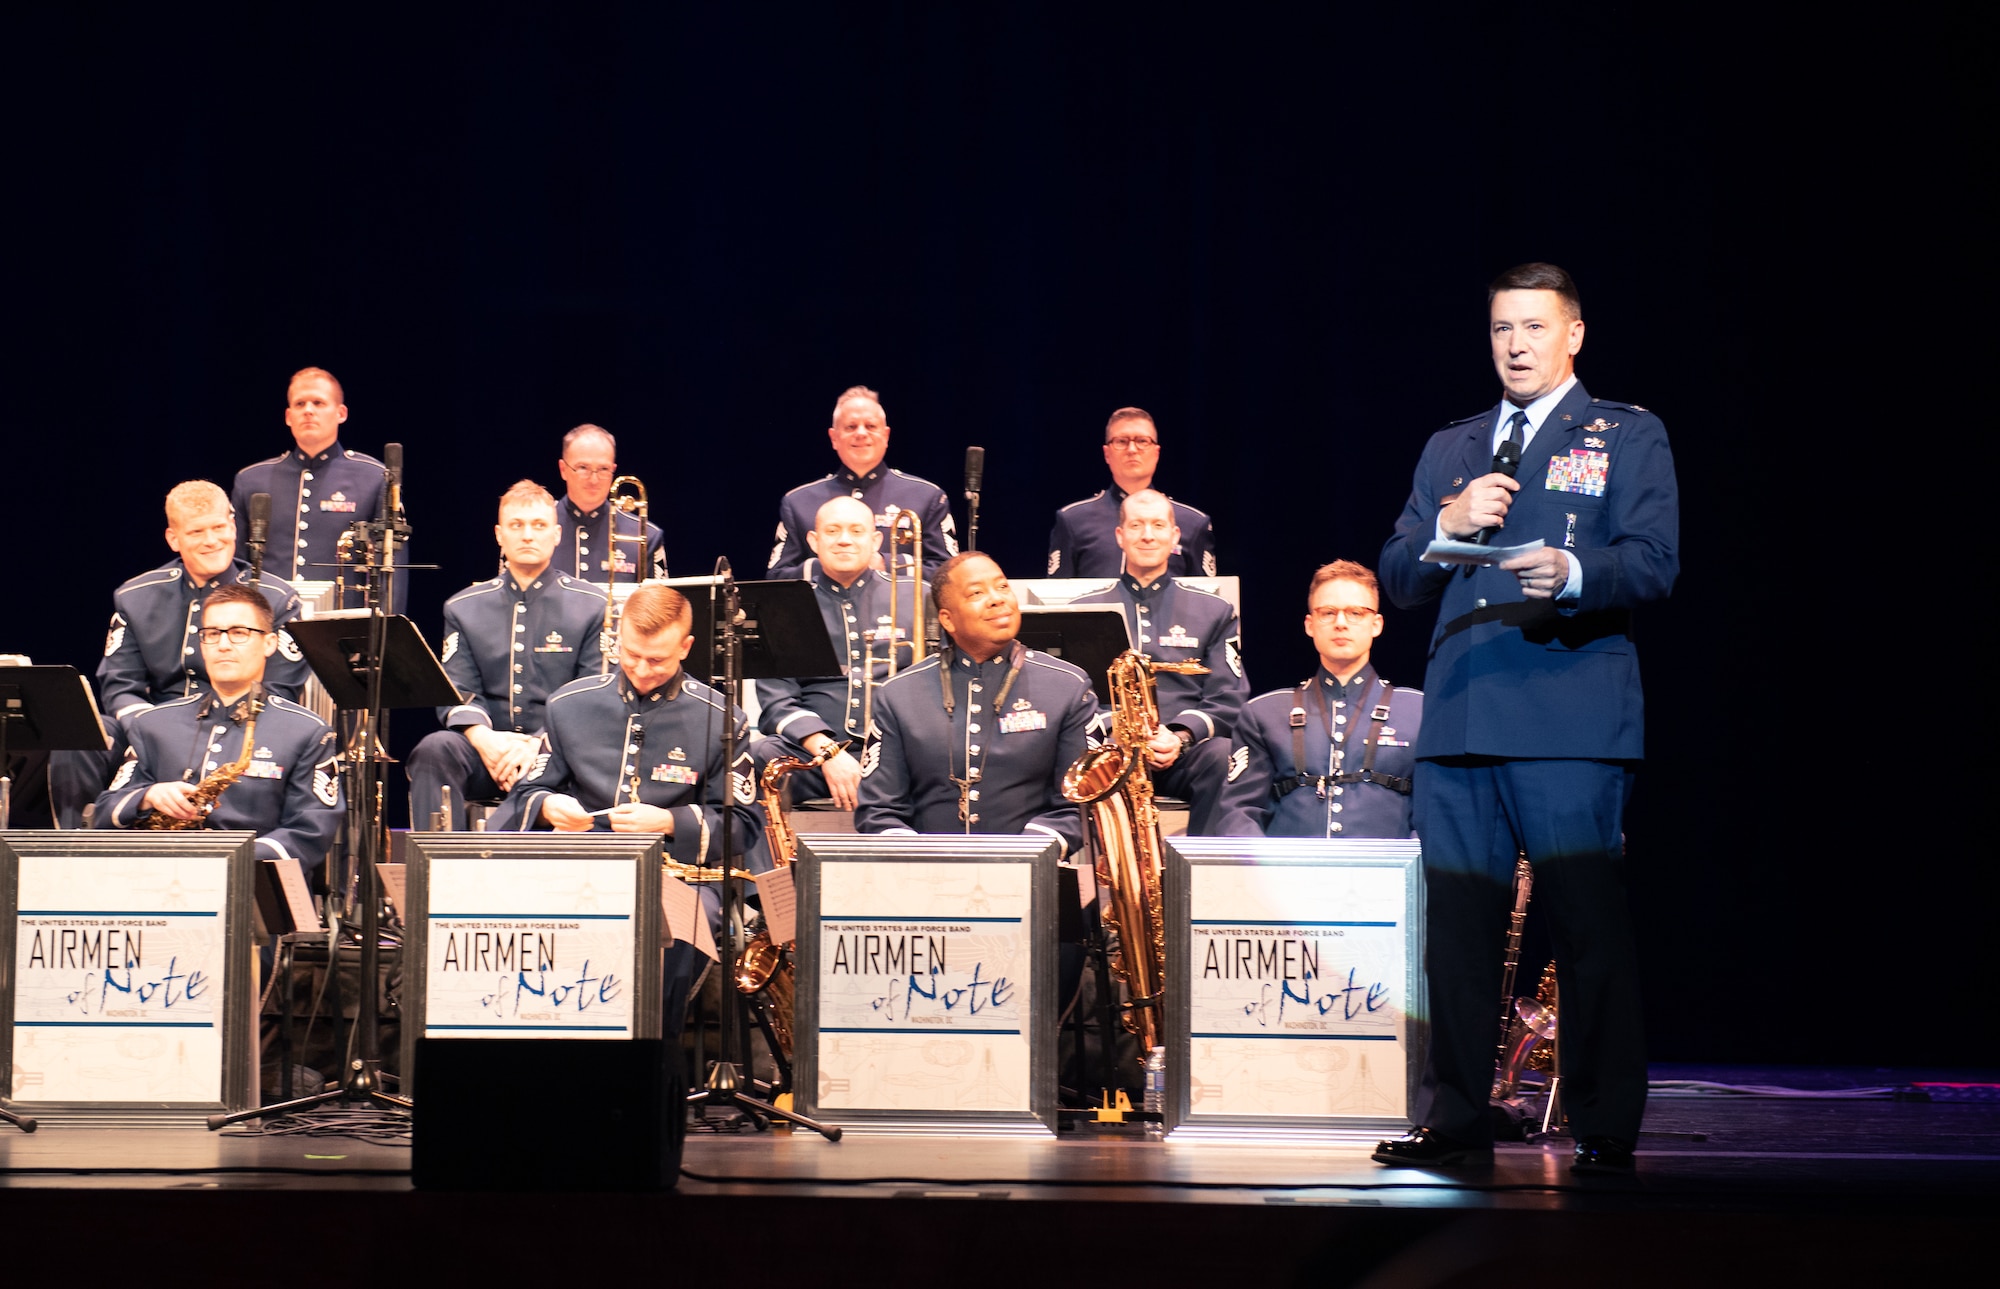 193rd Special Operations Wing commander, Col. Edward Fink, hosted a U.S. Air Force Band 'Airmen of Note' concert May 4, 2023, in York Pennsylvania.